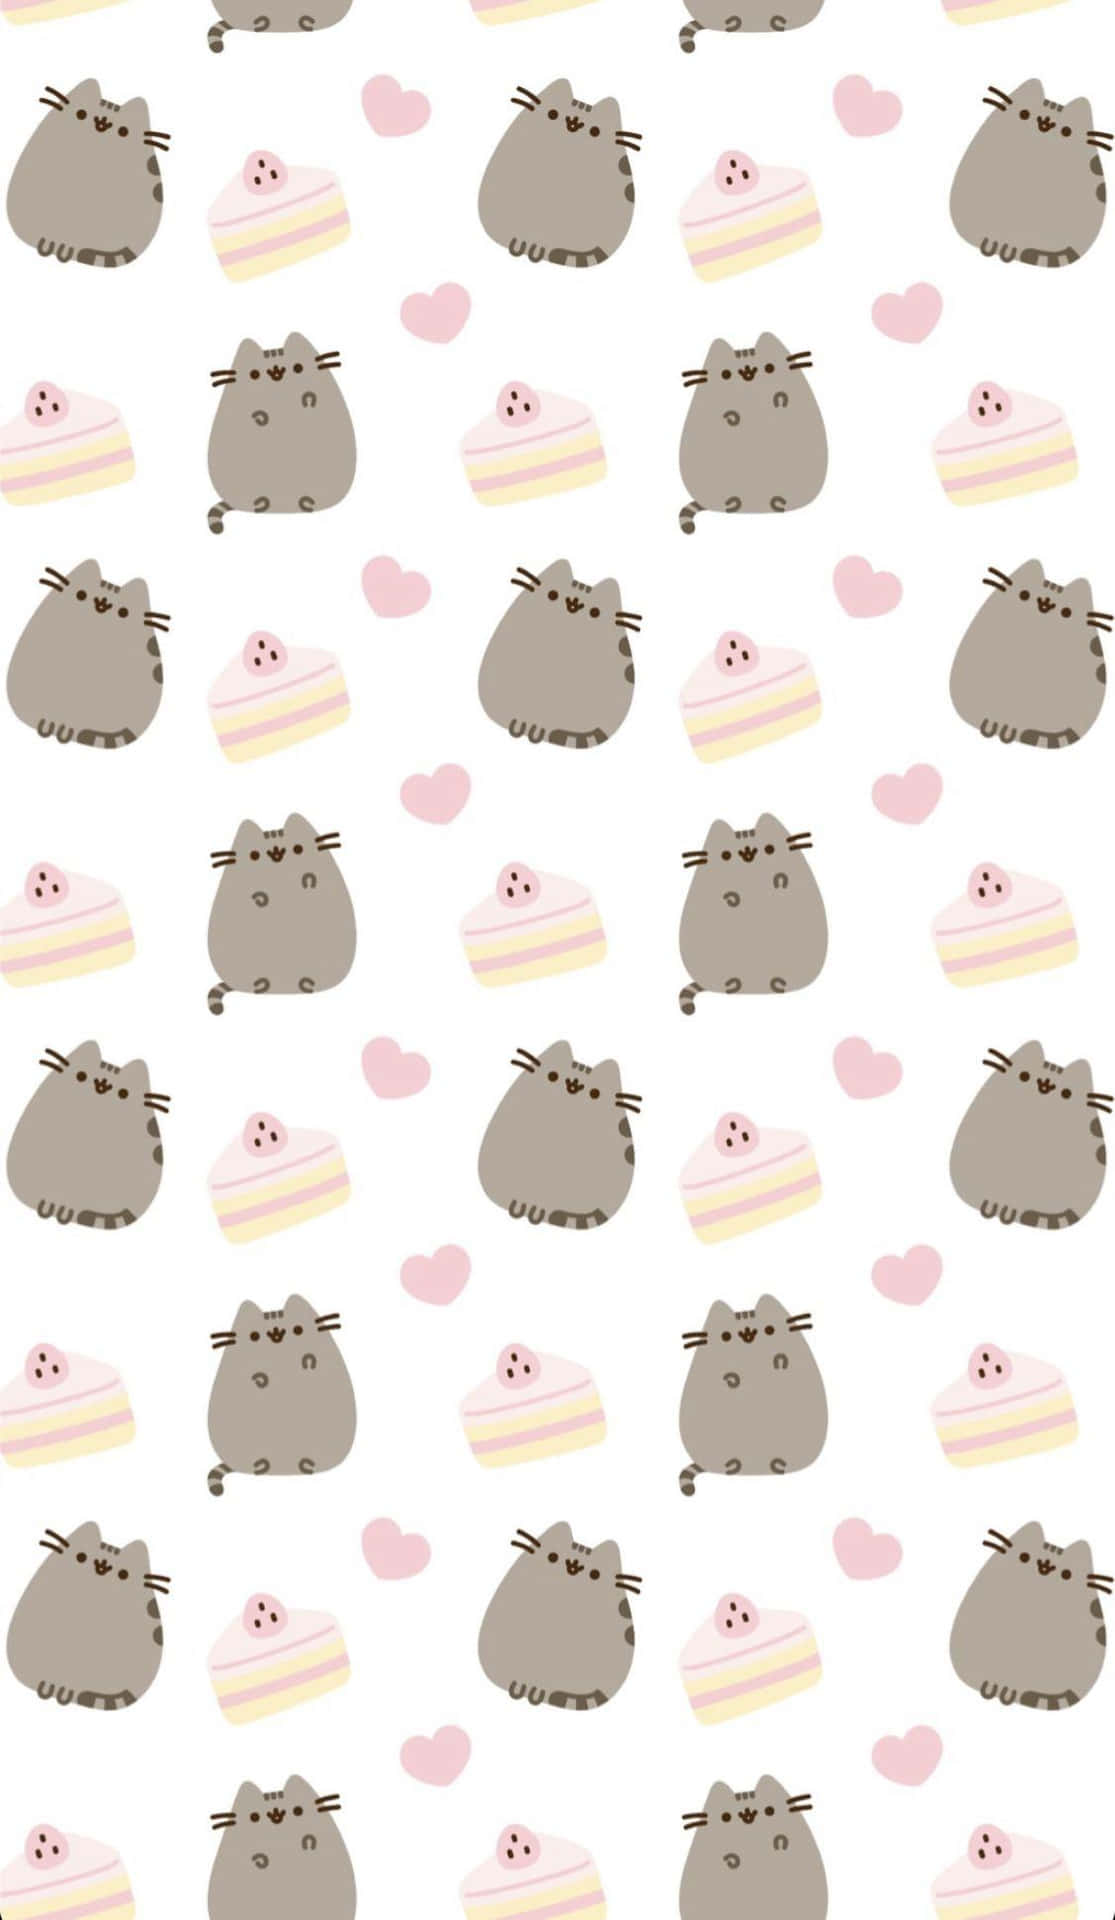 "For a Valentine's Day full of love and cuteness!" Wallpaper